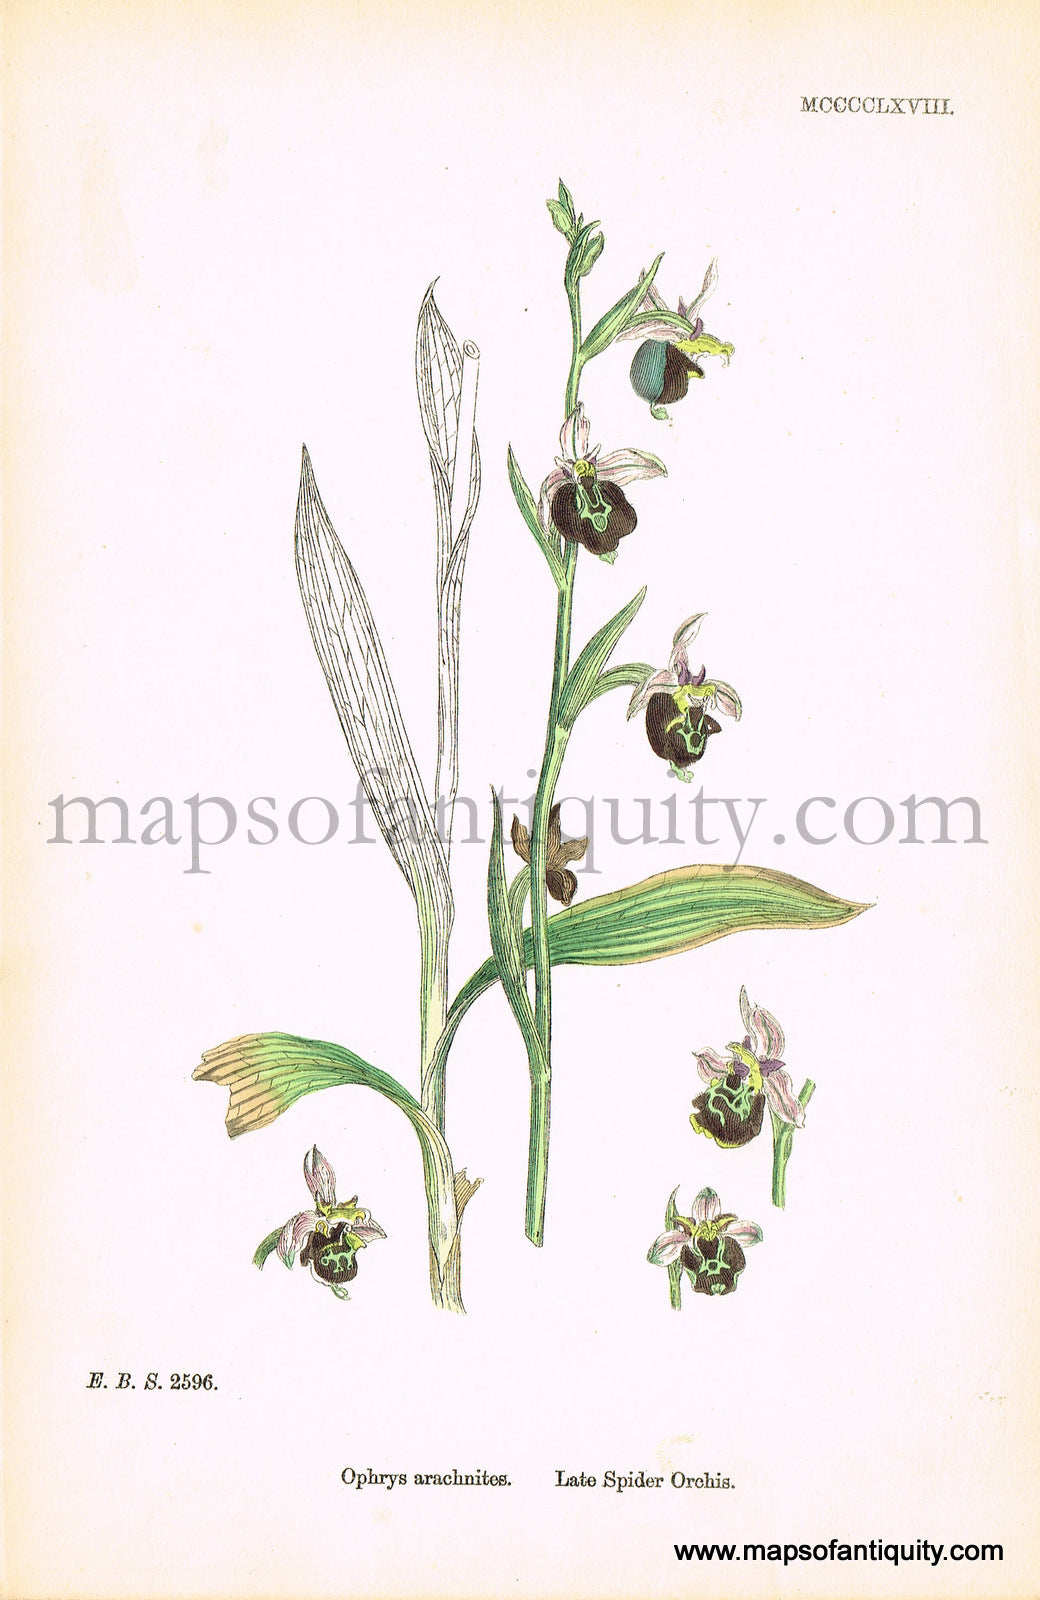 Antique-Hand-Colored-Print-Ophrys-arachnites-Antique-Prints-Natural-History-Botanical-c.-1860-Sowerby-Maps-Of-Antiquity